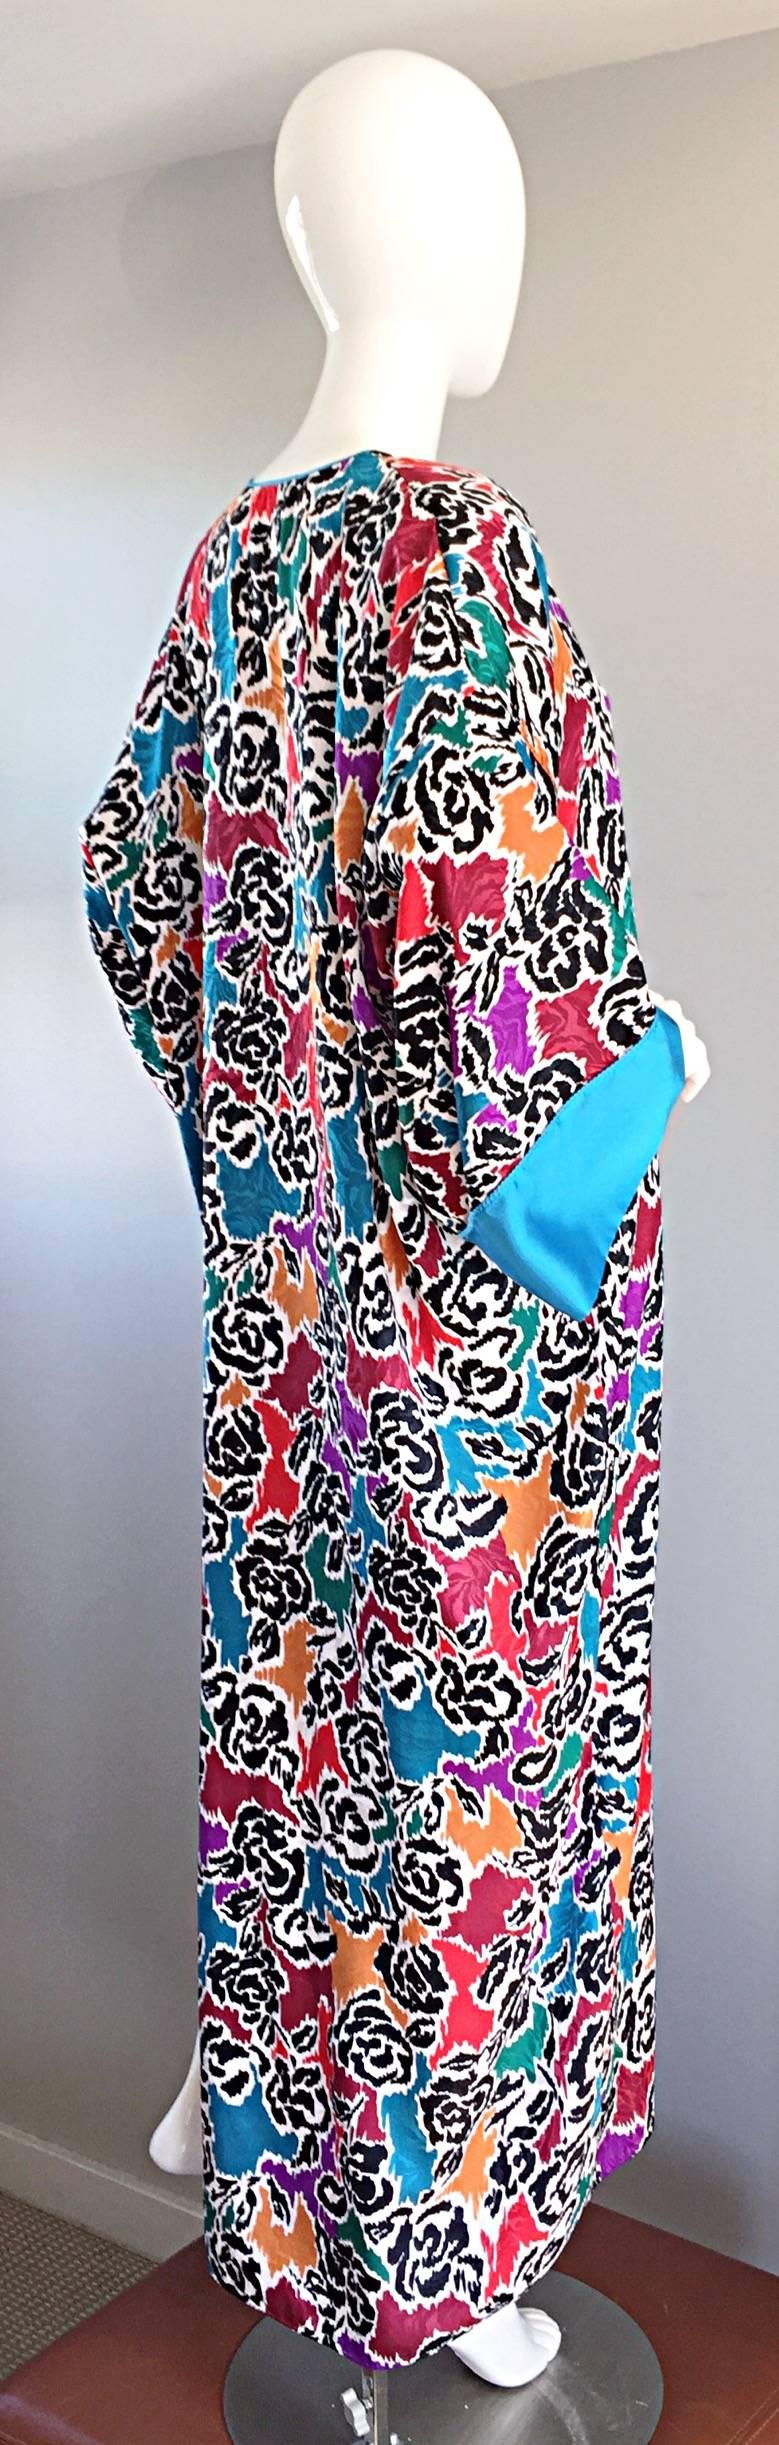 Mary McFadden for I. Magnin Wild Vintage Leopard + Floral Print Caftan Dress In Excellent Condition For Sale In San Diego, CA